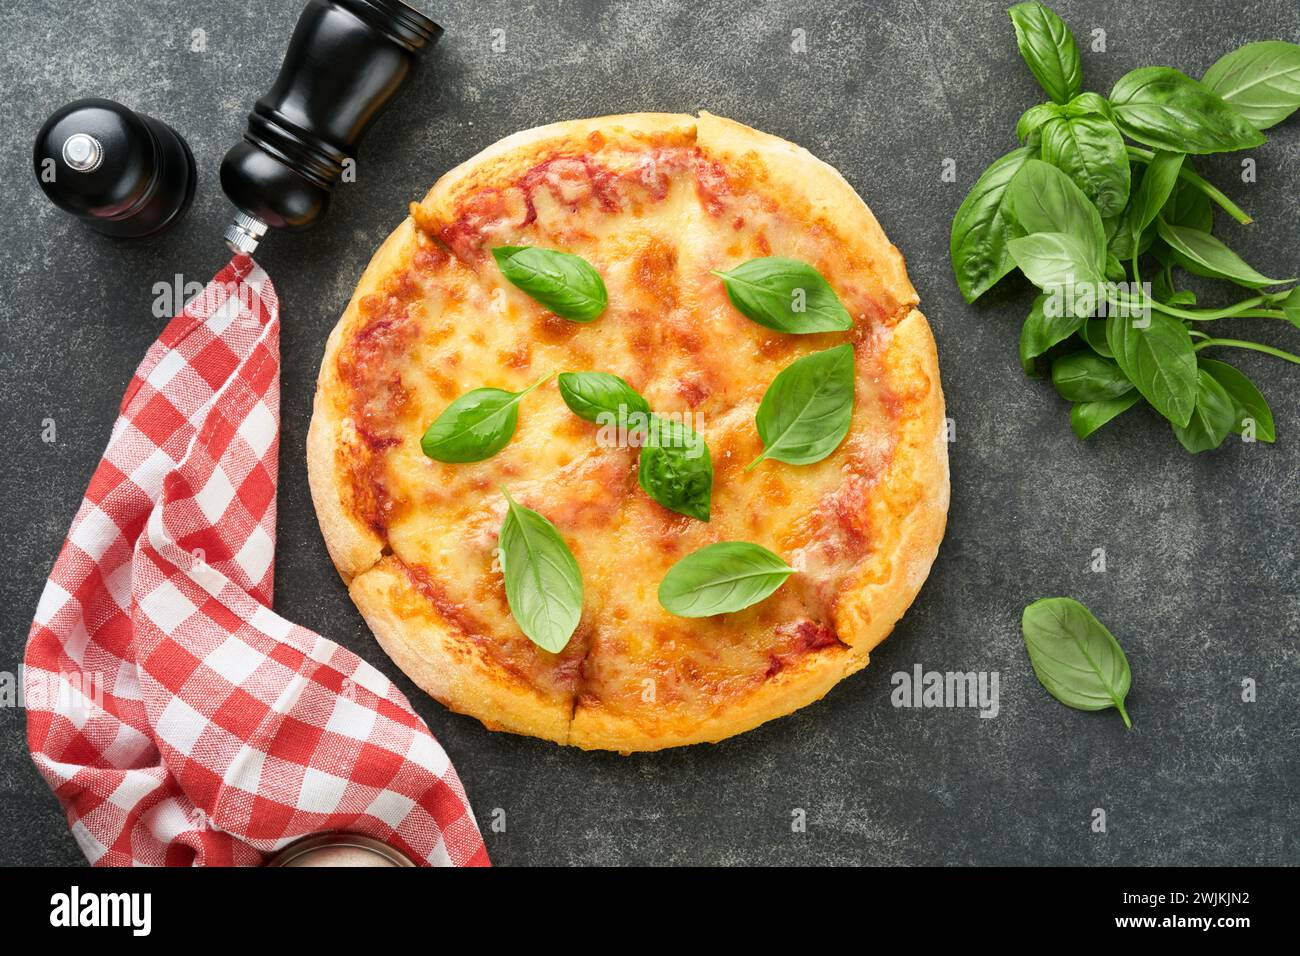 Margarita pizza. Traditional neapolitan margarita pizza and cooking ingredients tomatoes basil on old concrete texture background table. Italian Tradi Stock Photo